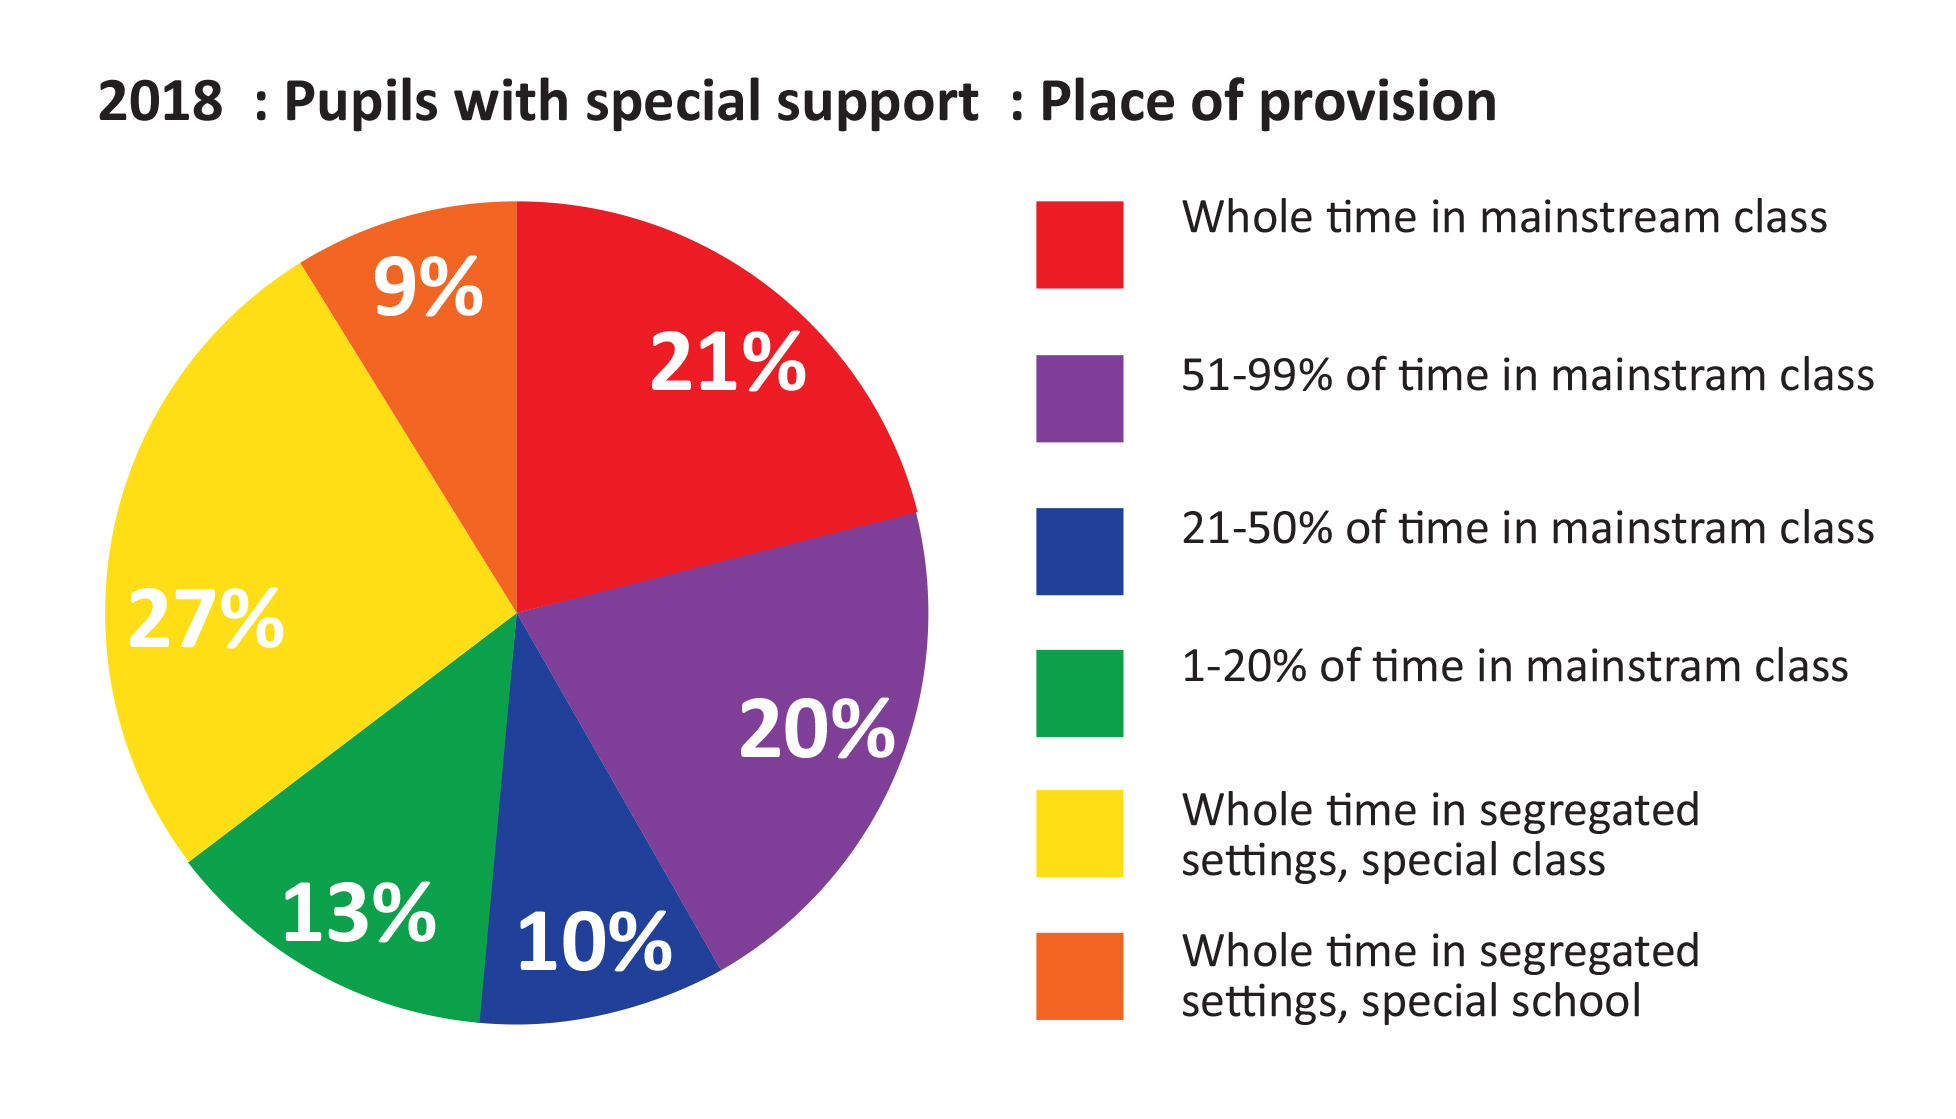 The pie chart shows the placement of learners who received special support in 2018. 21% of learners spent the whole time in mainstream classes; 20% of learners spent 51-99% of their time in mainstream classes; 10% of learners spent 21-50% of their time in mainstream classes; 13% of learners spent 1-20% of their time in mainstream classes; 27% of learners spent the whole time in segregated settings in special classes; 9% of learners spent the whole time in segregated settings in special schools.